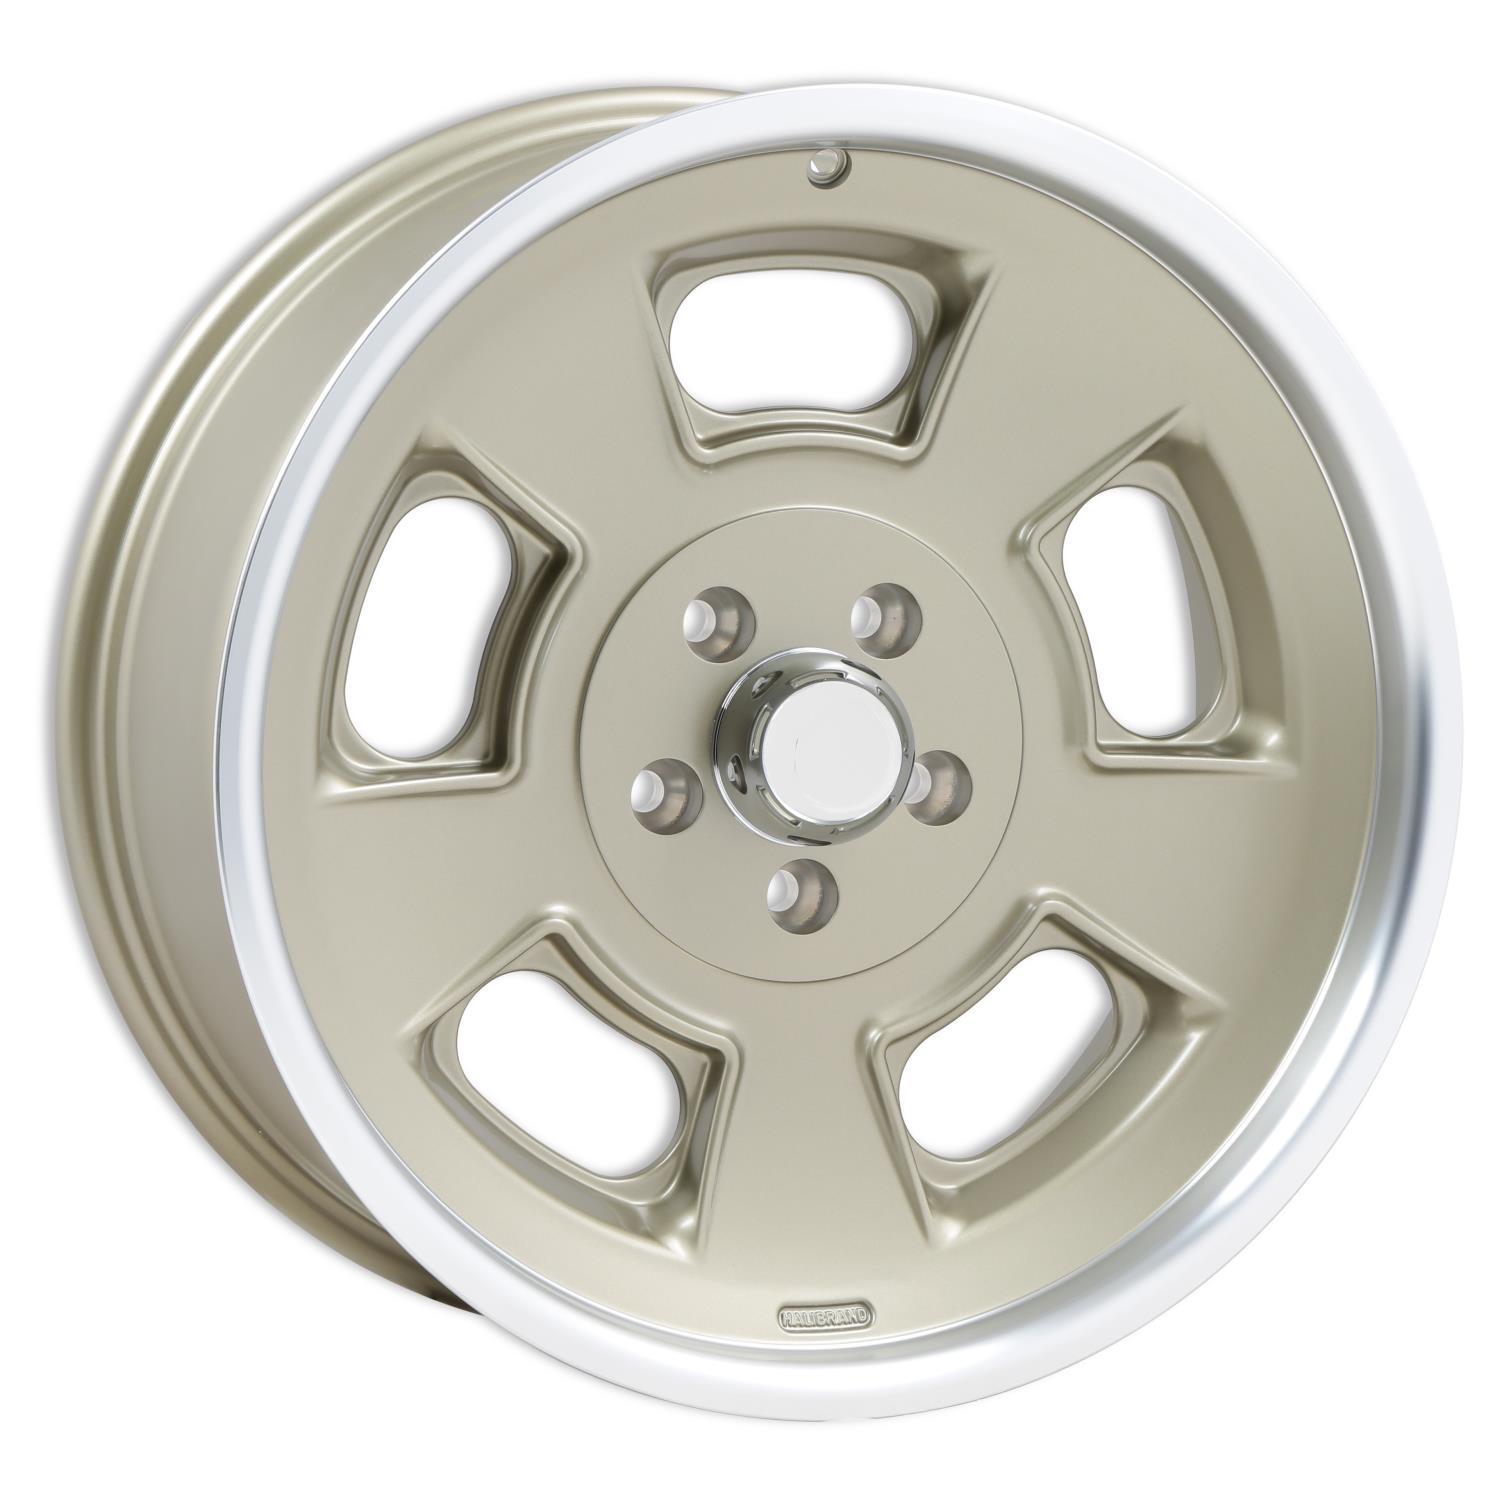 Sprint Front Wheel, Size: 20x8.5", Bolt Pattern: 5x5", Backspace: 5.25" [MAG7 with Machined Lip - Semi Gloss Clearcoat]